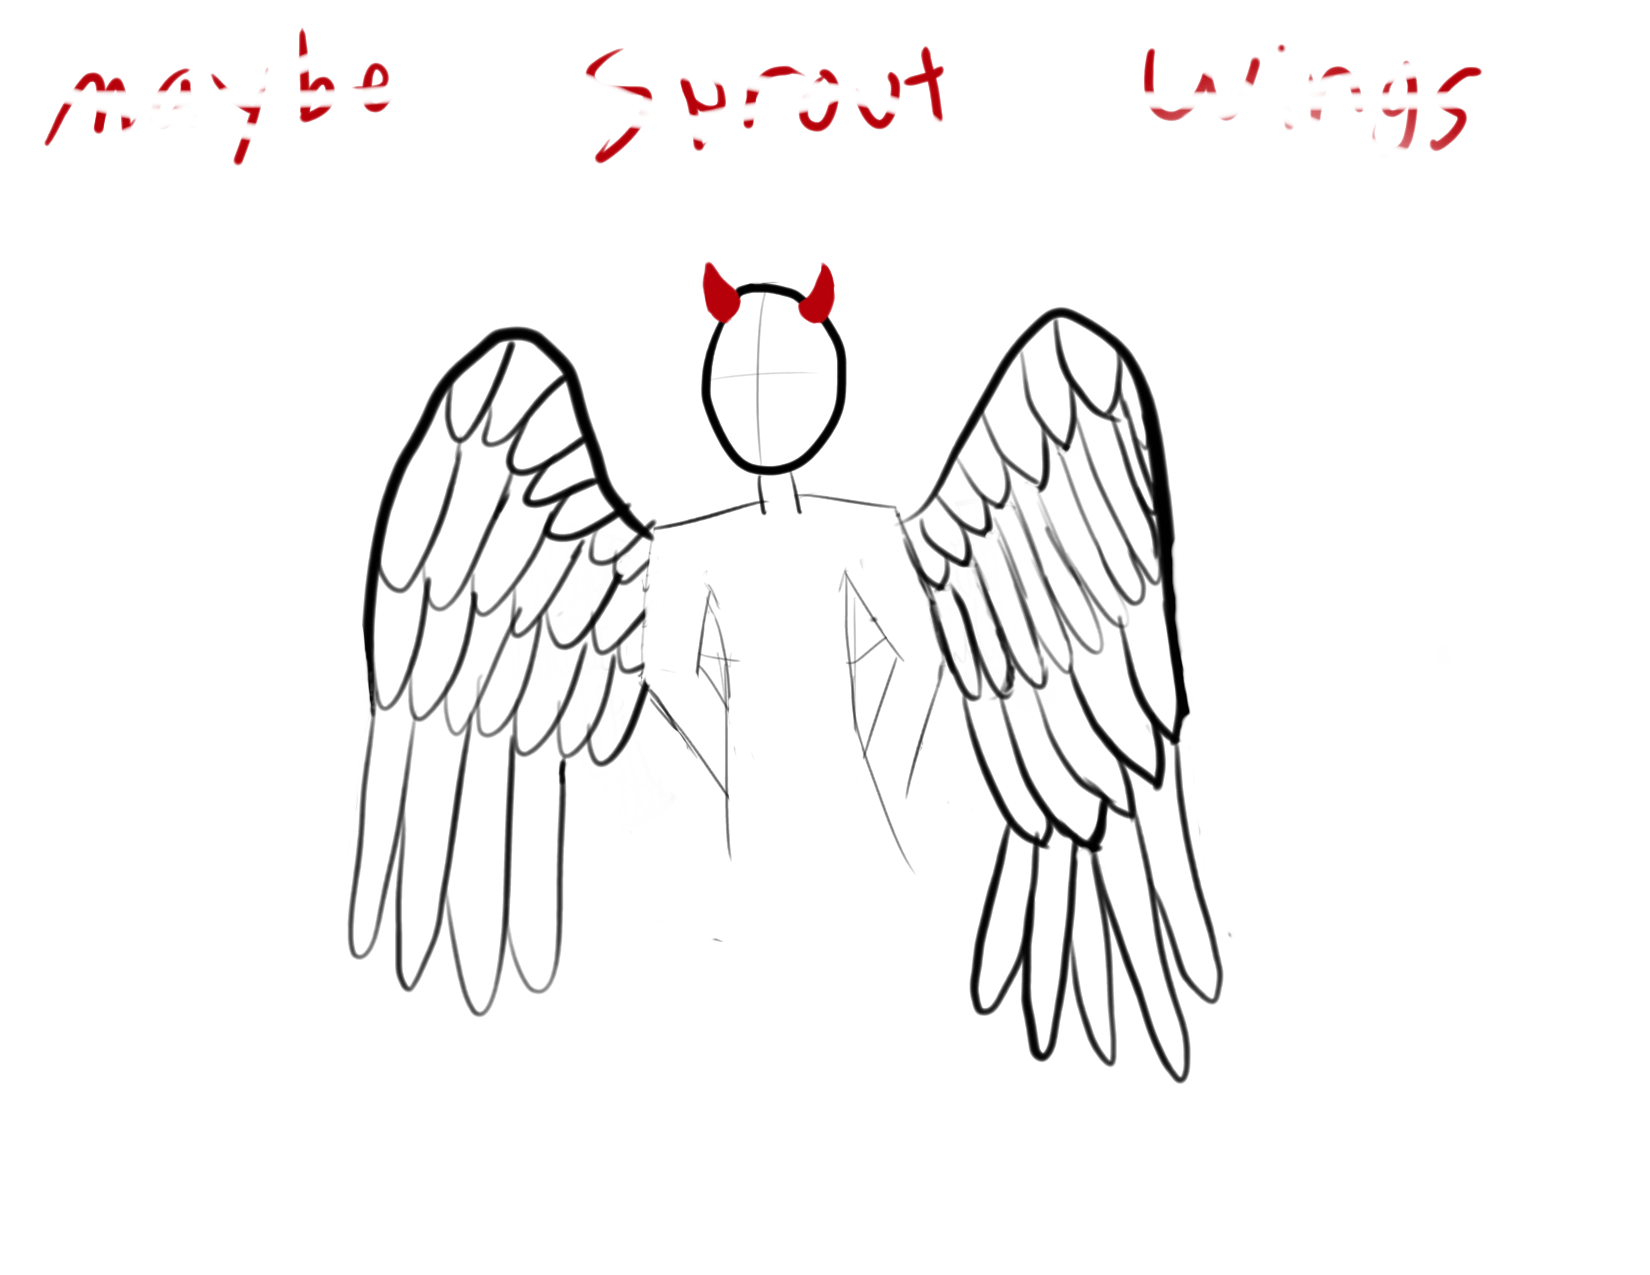 a winged, horned, individual with no face stands, with the text maybe sprout wings